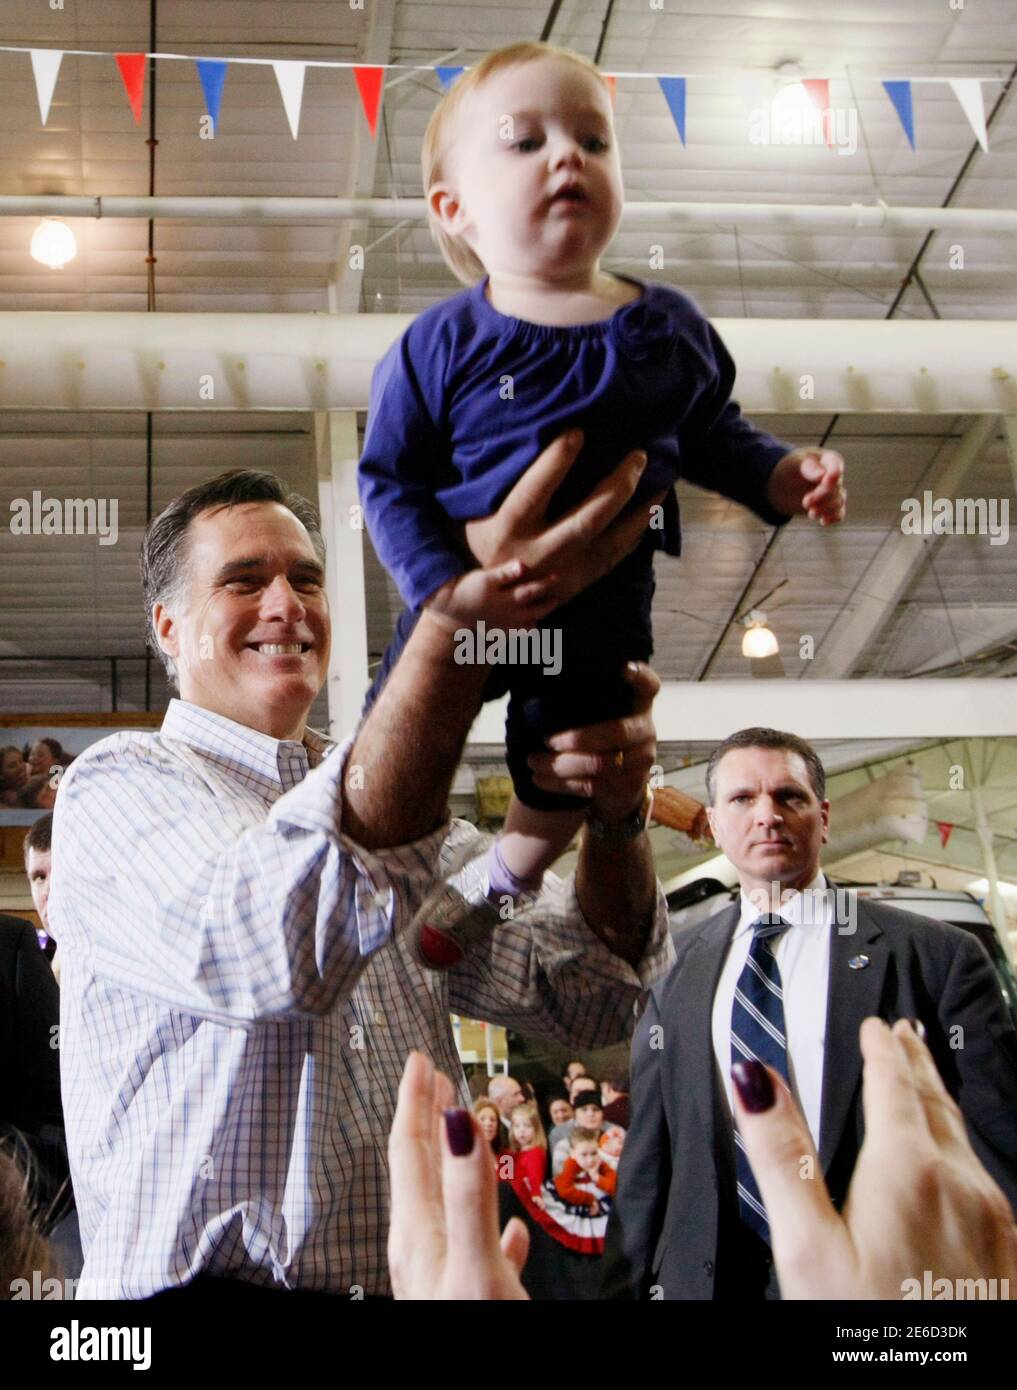 Republican presidential candidate Mitt Romney hands Madison Busch, 1, to her mother after a campaign event at an RV dealer in Loveland, Colorado February 7, 2012. The Colorado caucuses take place today. REUTERS/Rick Wilking (UNITED STATES - Tags: POLITICS TPX IMAGES OF THE DAY) Stock Photo